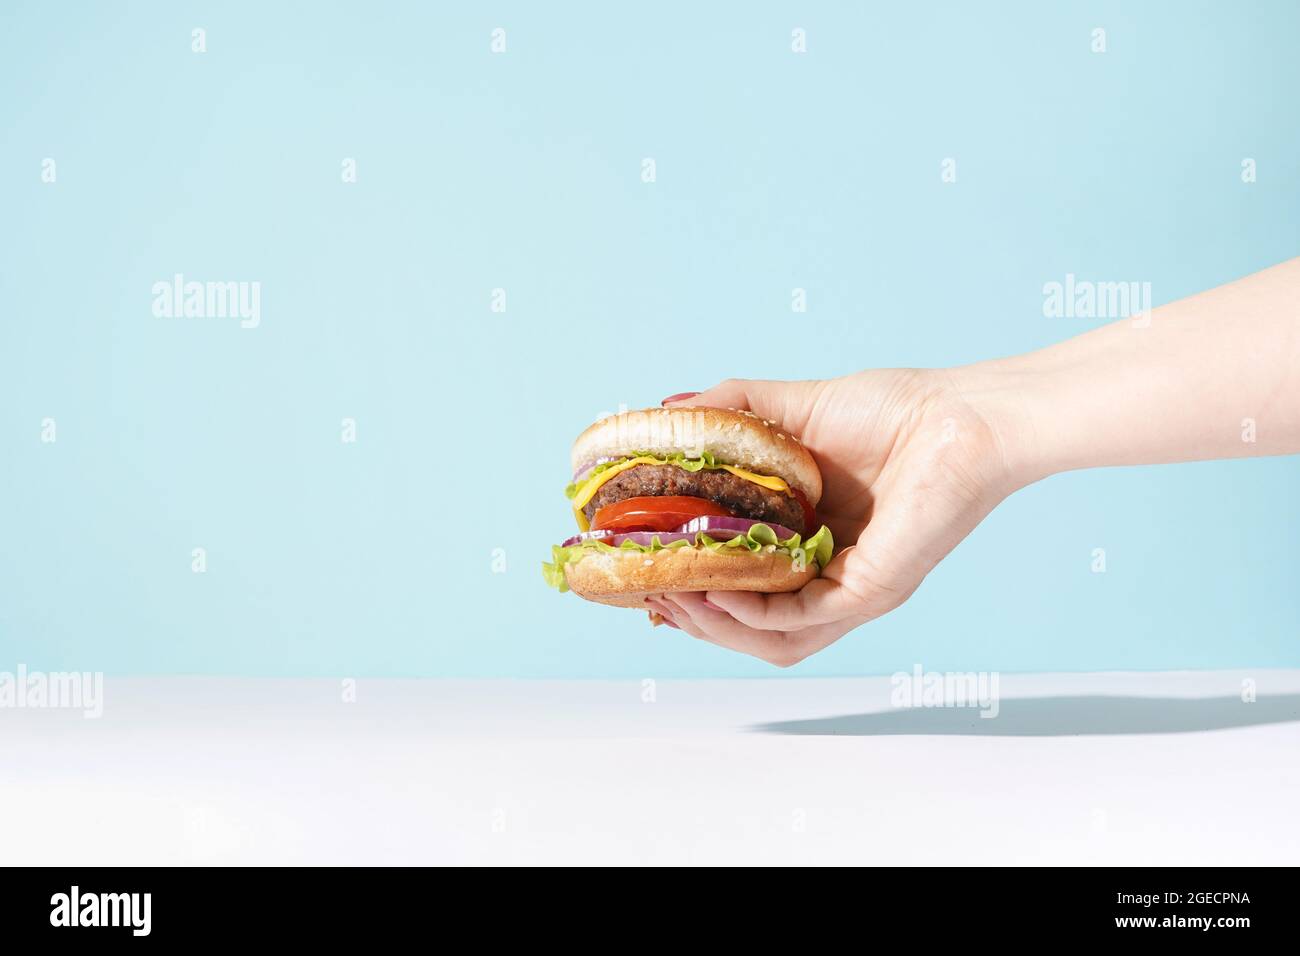 Hand holding a burger on blue background. eating and healthy concept, copy space Stock Photo